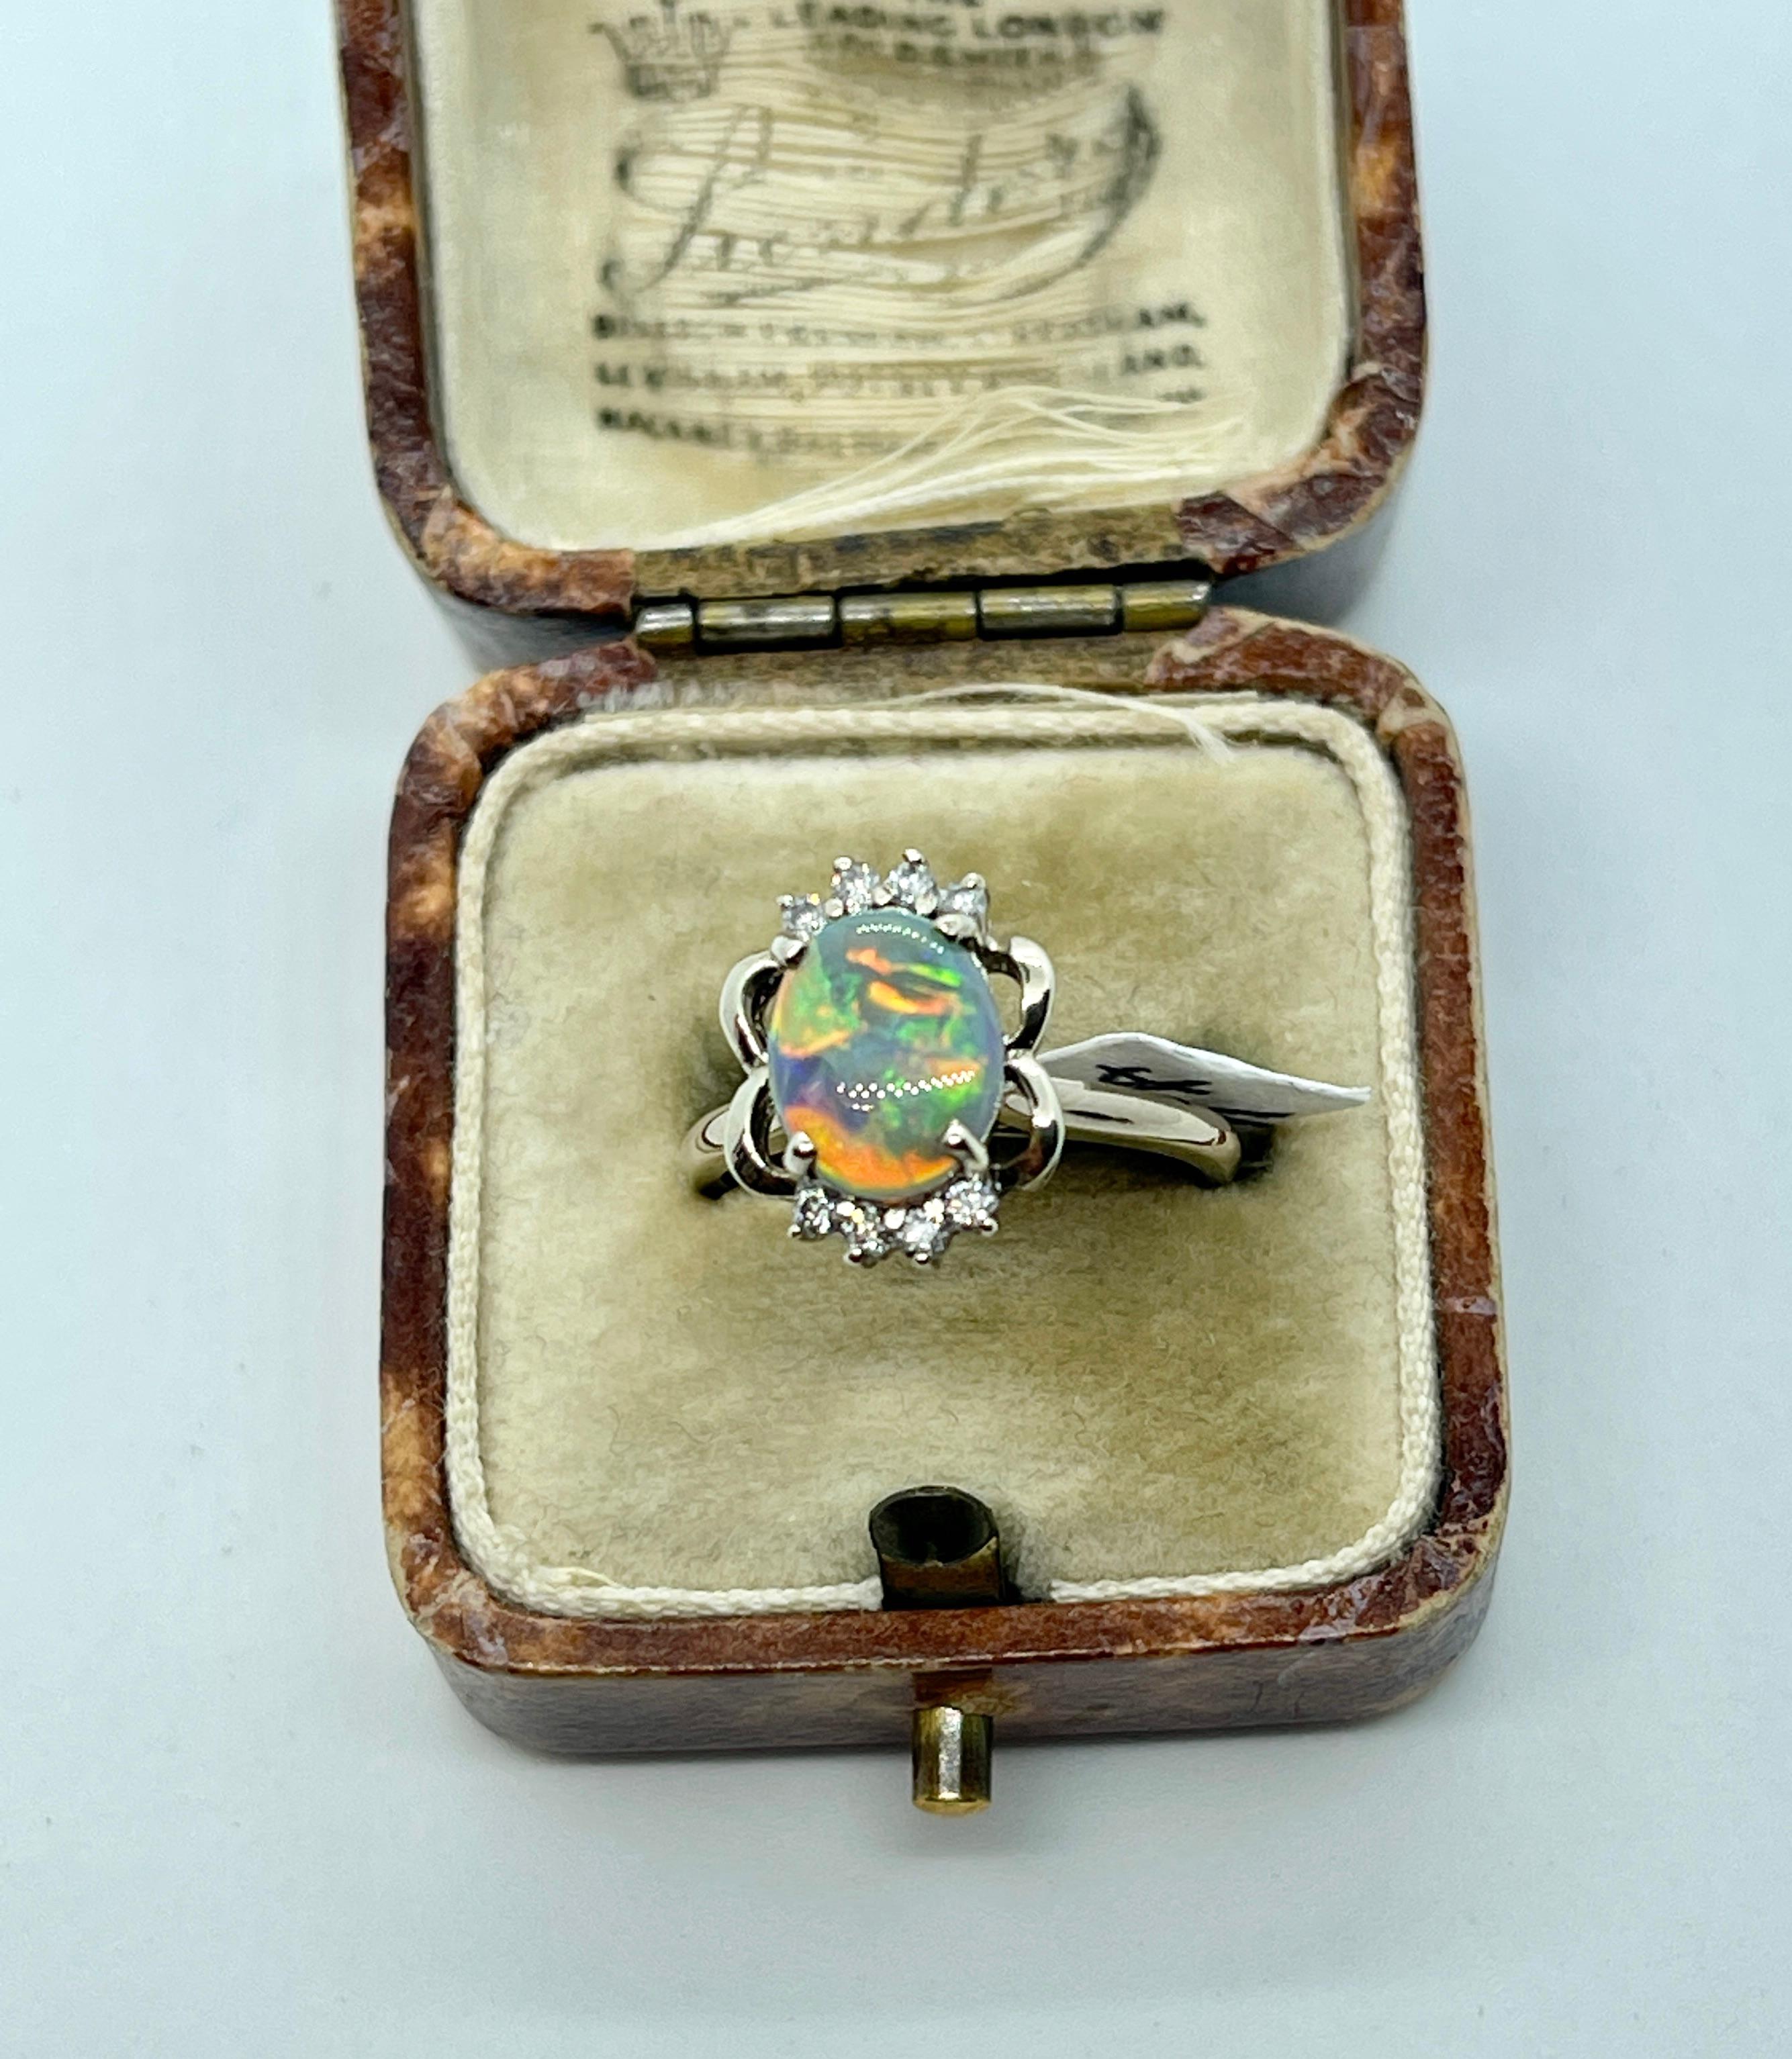 Women's Rare Harlequin Pattern Solid Semi Black Opal Diamond Ring 9ct Gold Valuation For Sale